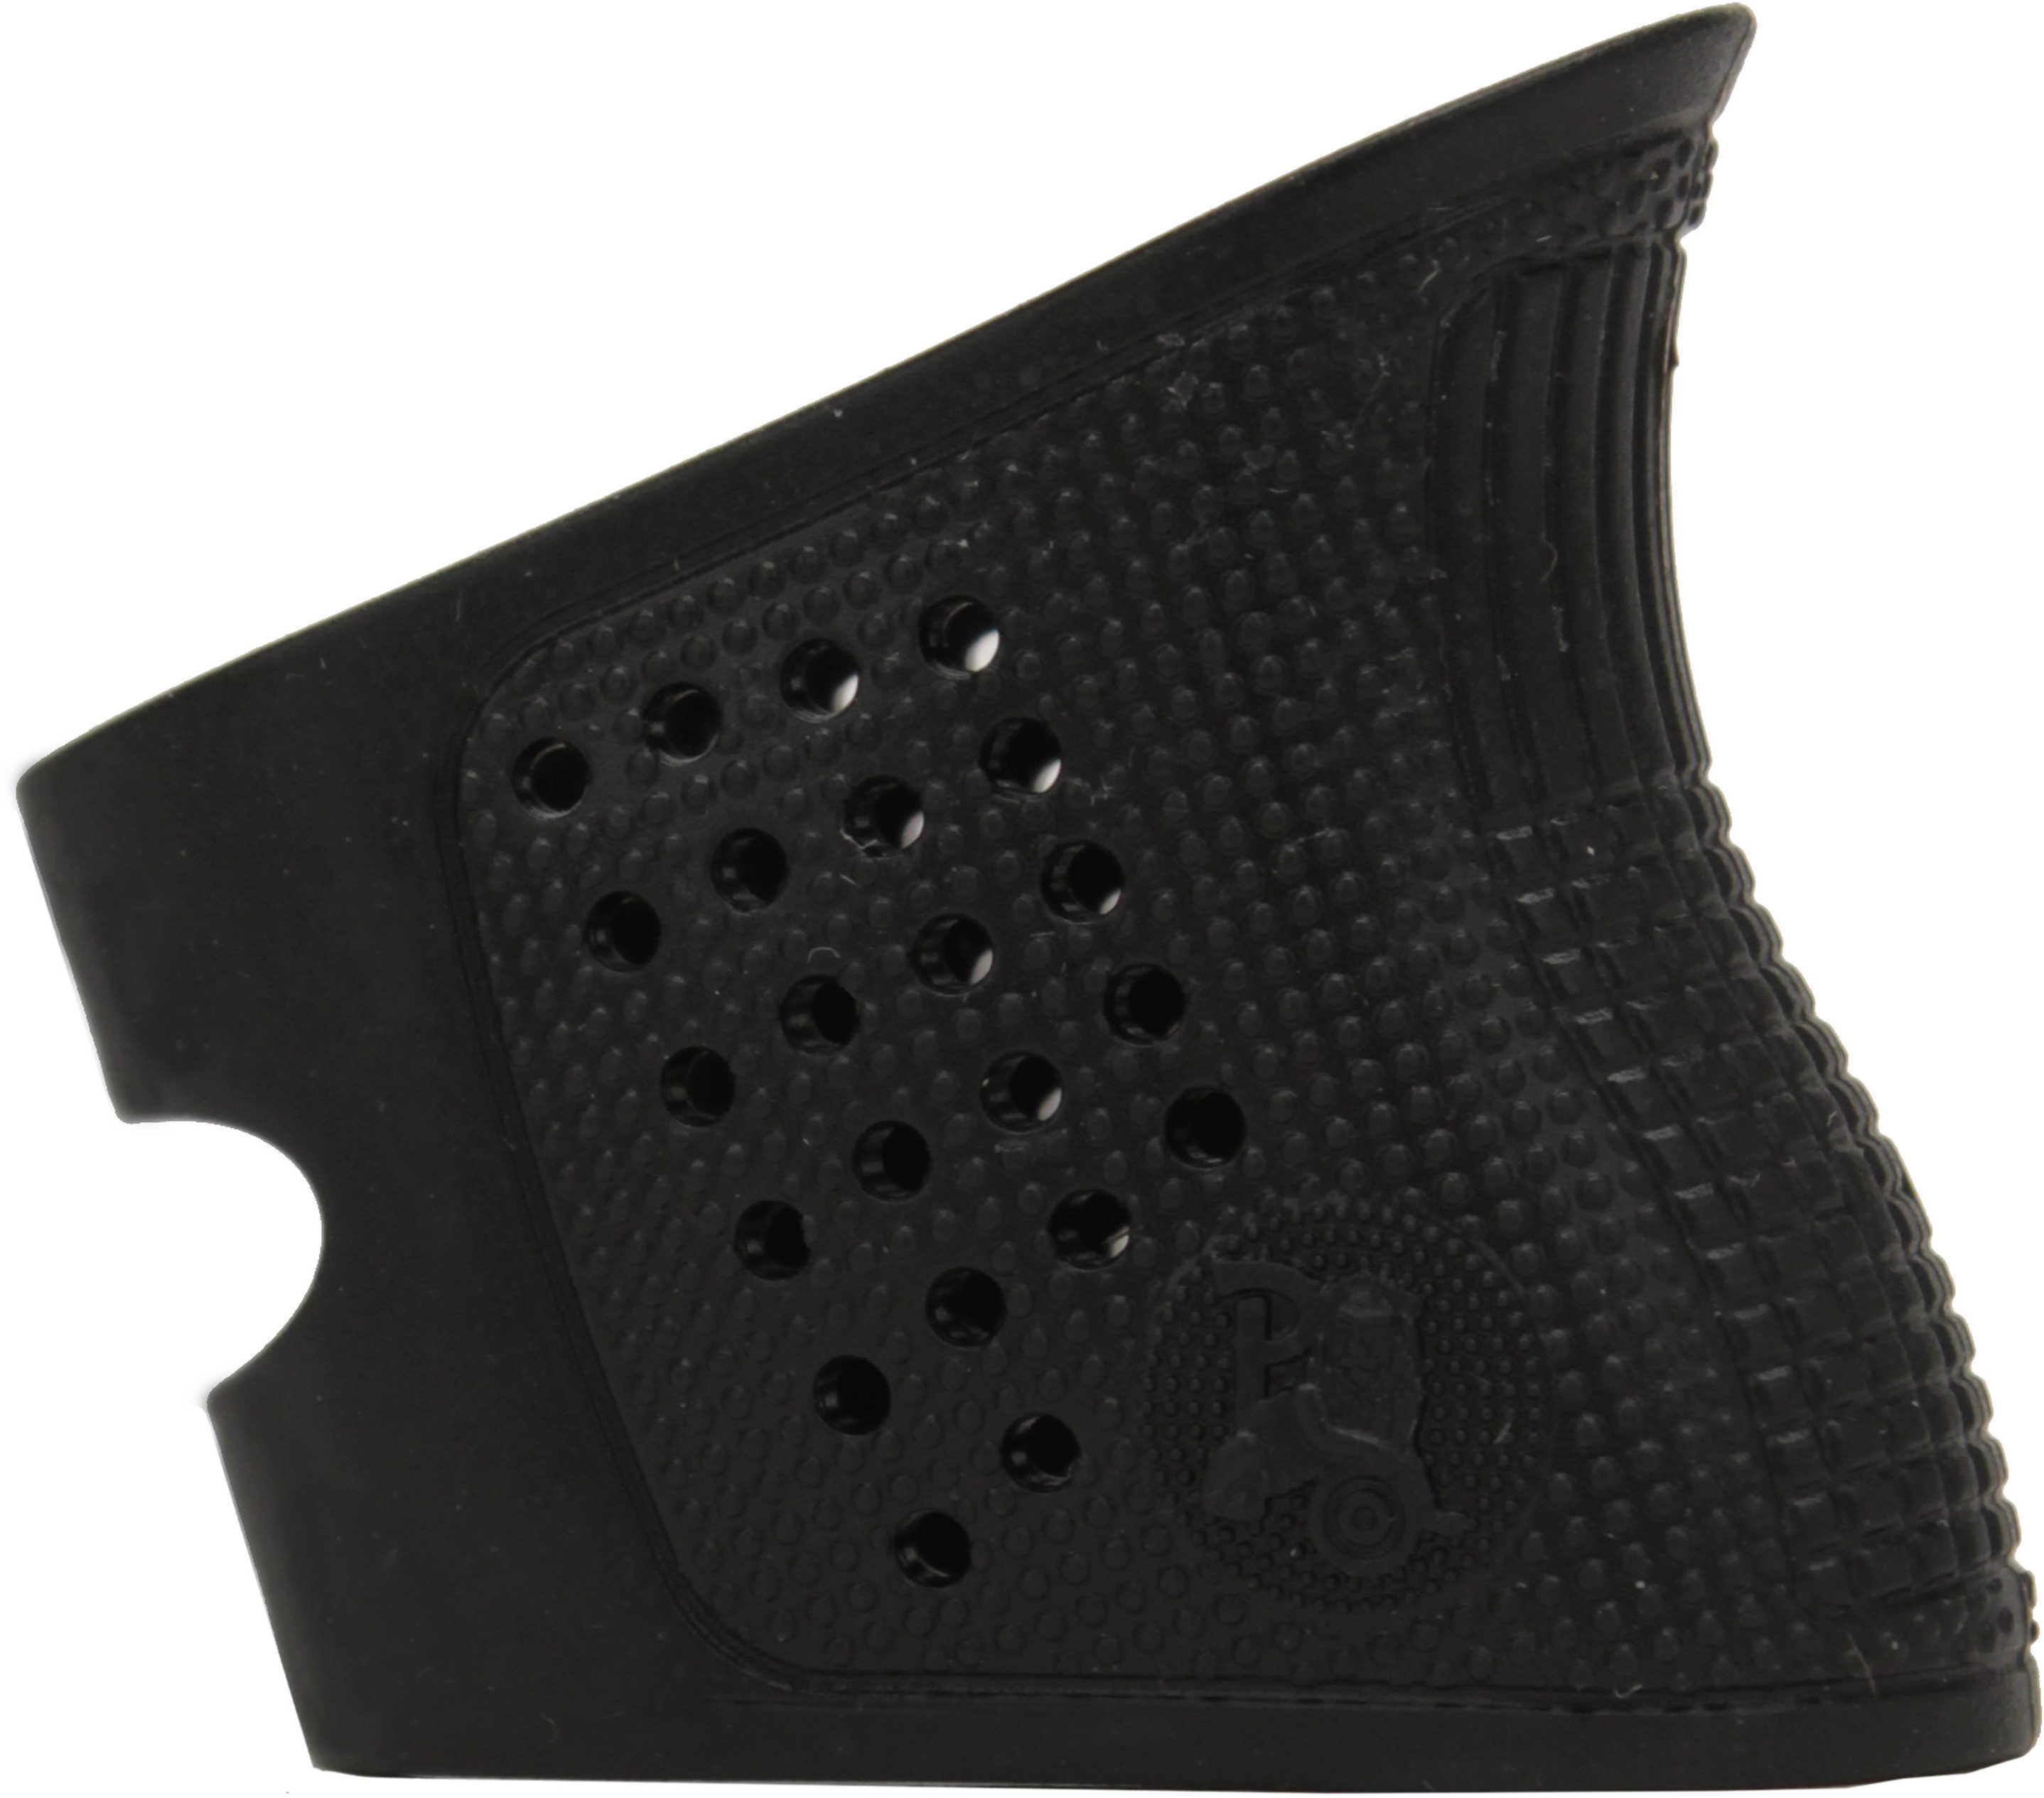 Pachmayr Tactical Grip Glove for Glock Subcompact